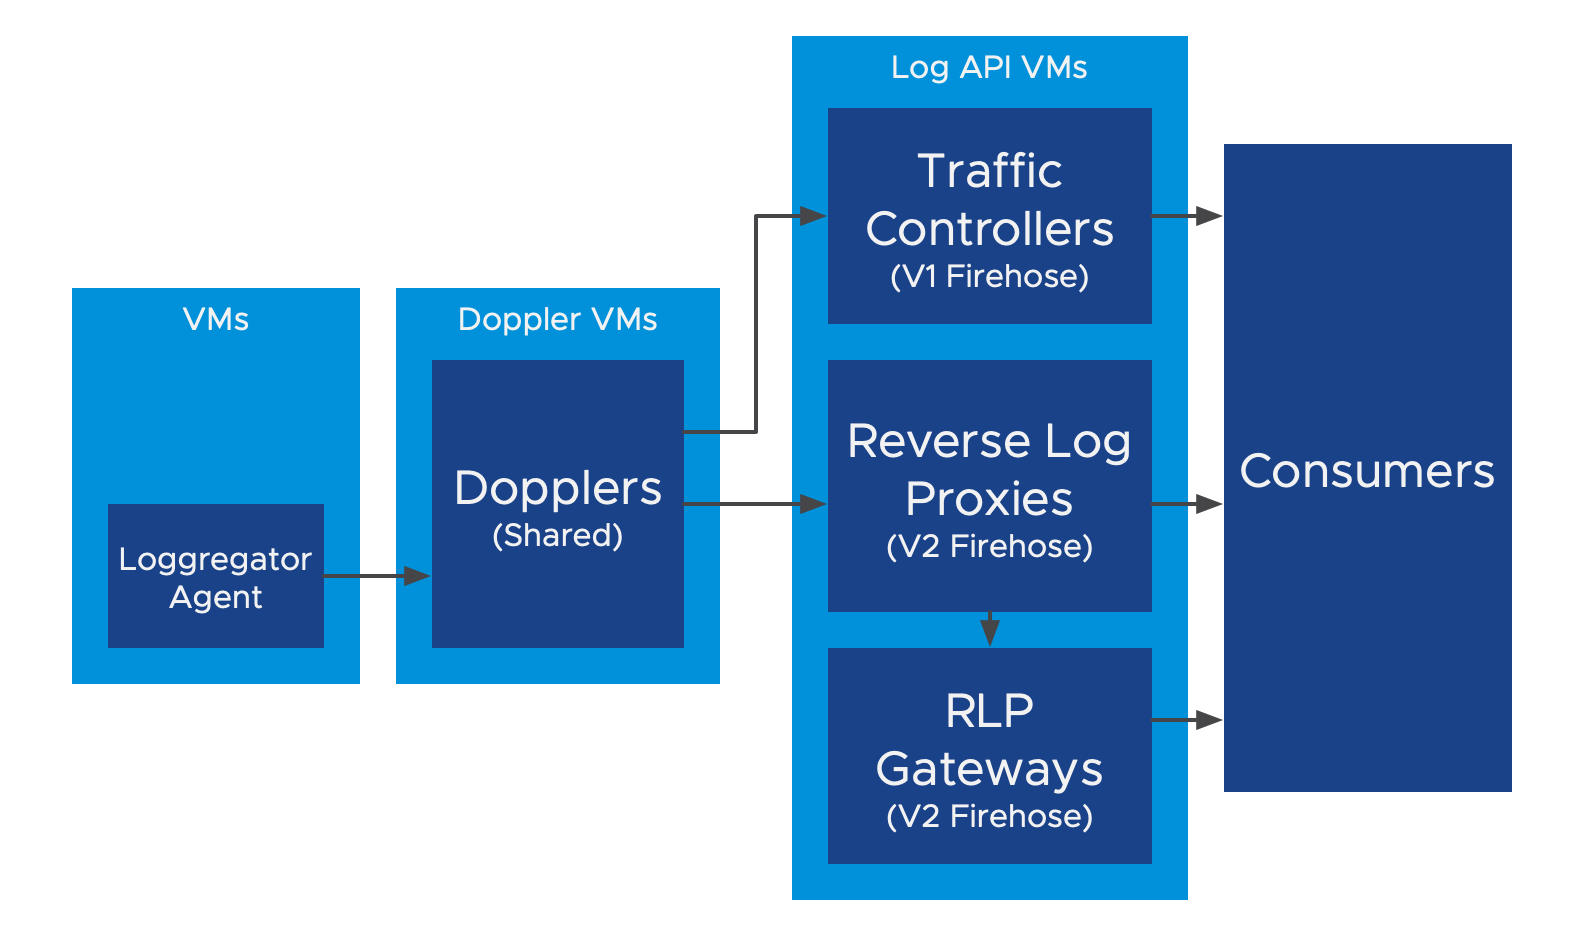 A Loggregator Agent appears inside the VMs block. Loggregator Agents send to Dopplers, located on Doppler VMs. Dopplers, in turn, send to both Traffic Controllers and Reverse Log Proxies.